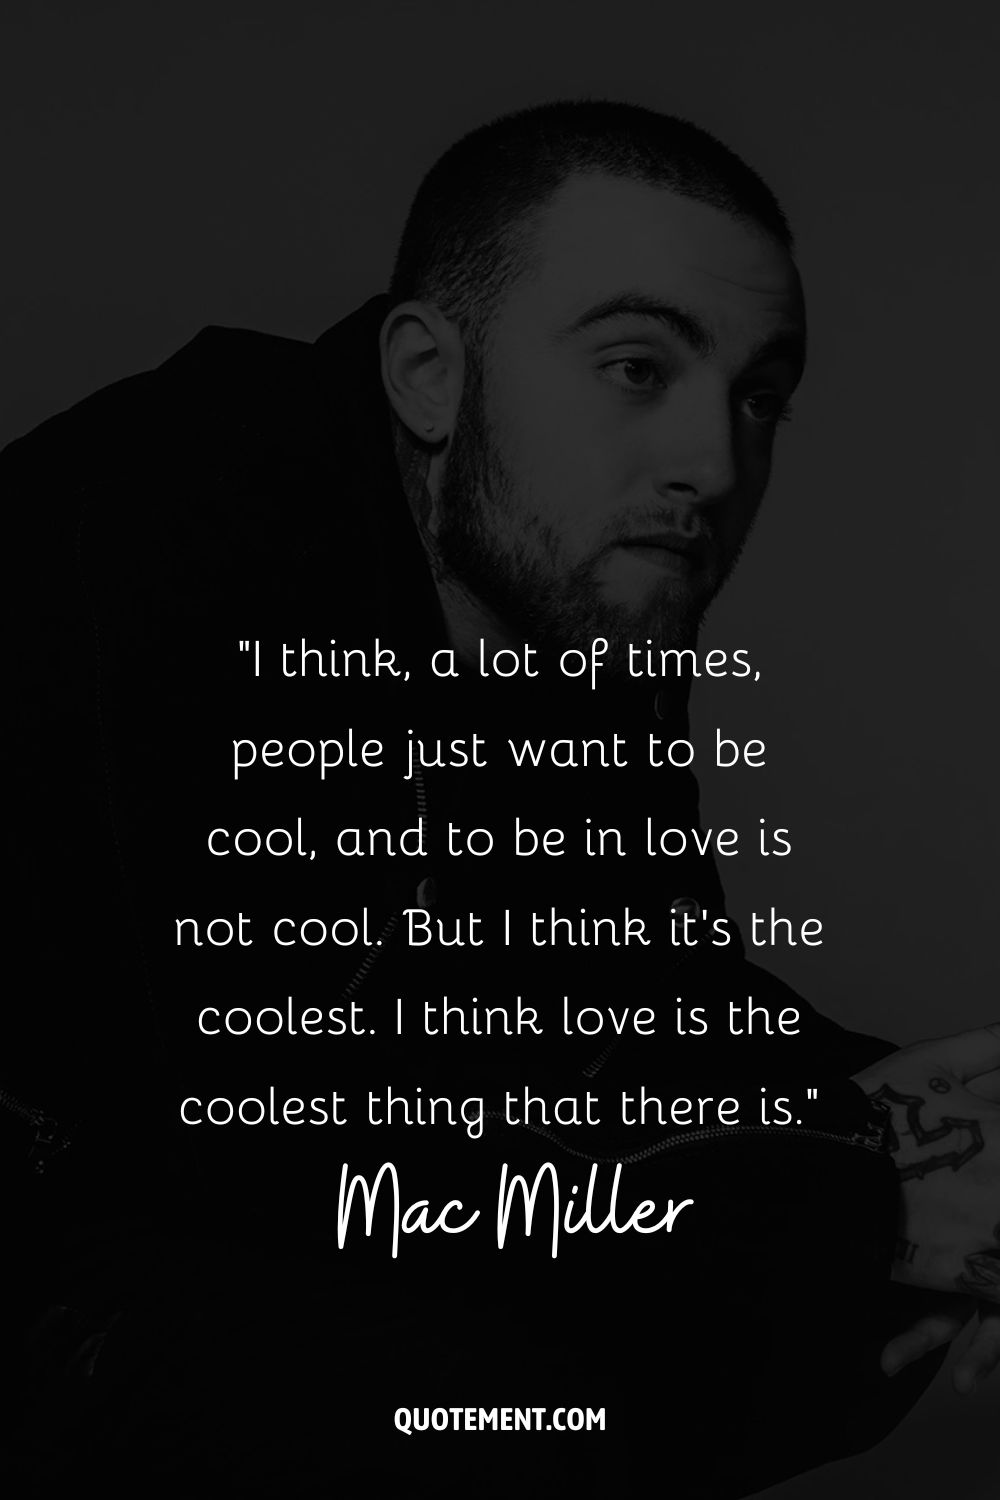 “I think, a lot of times, people just want to be cool, and to be in love is not cool.